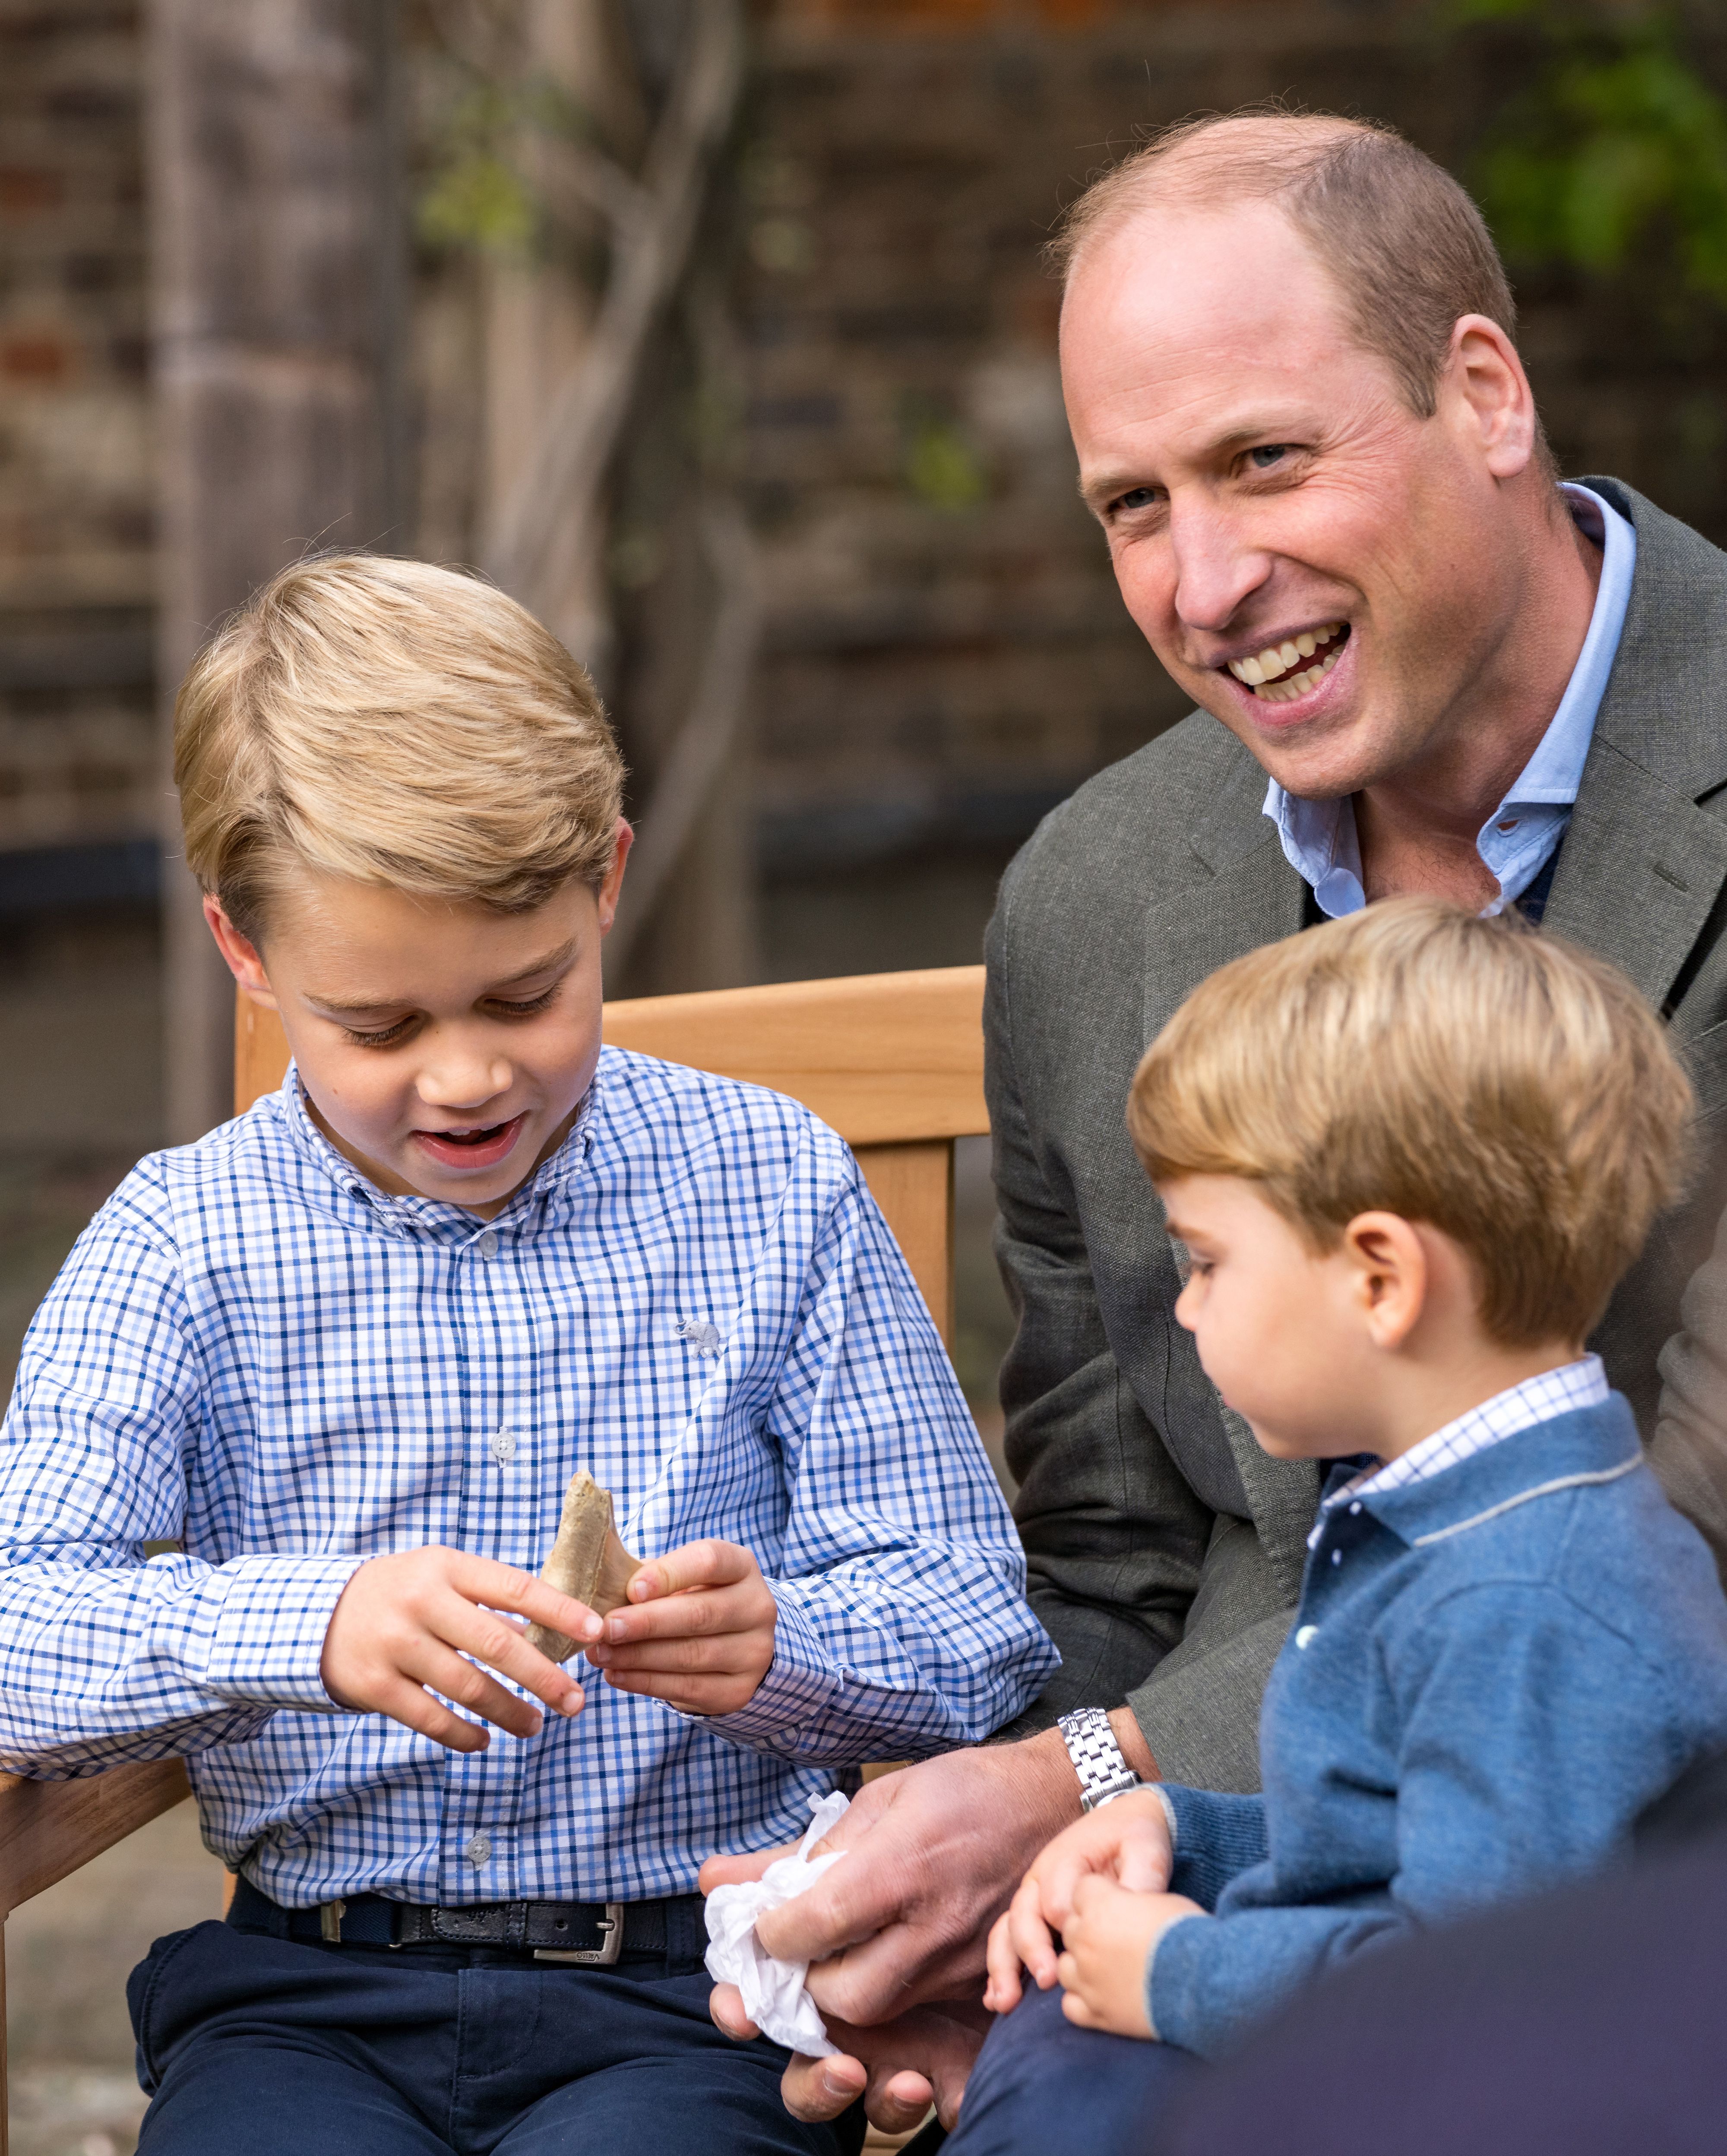 Prince George, Prince William, and Prince Louis in the gardens of Kensington Palace on September 24, 2020, in London, England | Photo: Kensington Palace/Getty Images